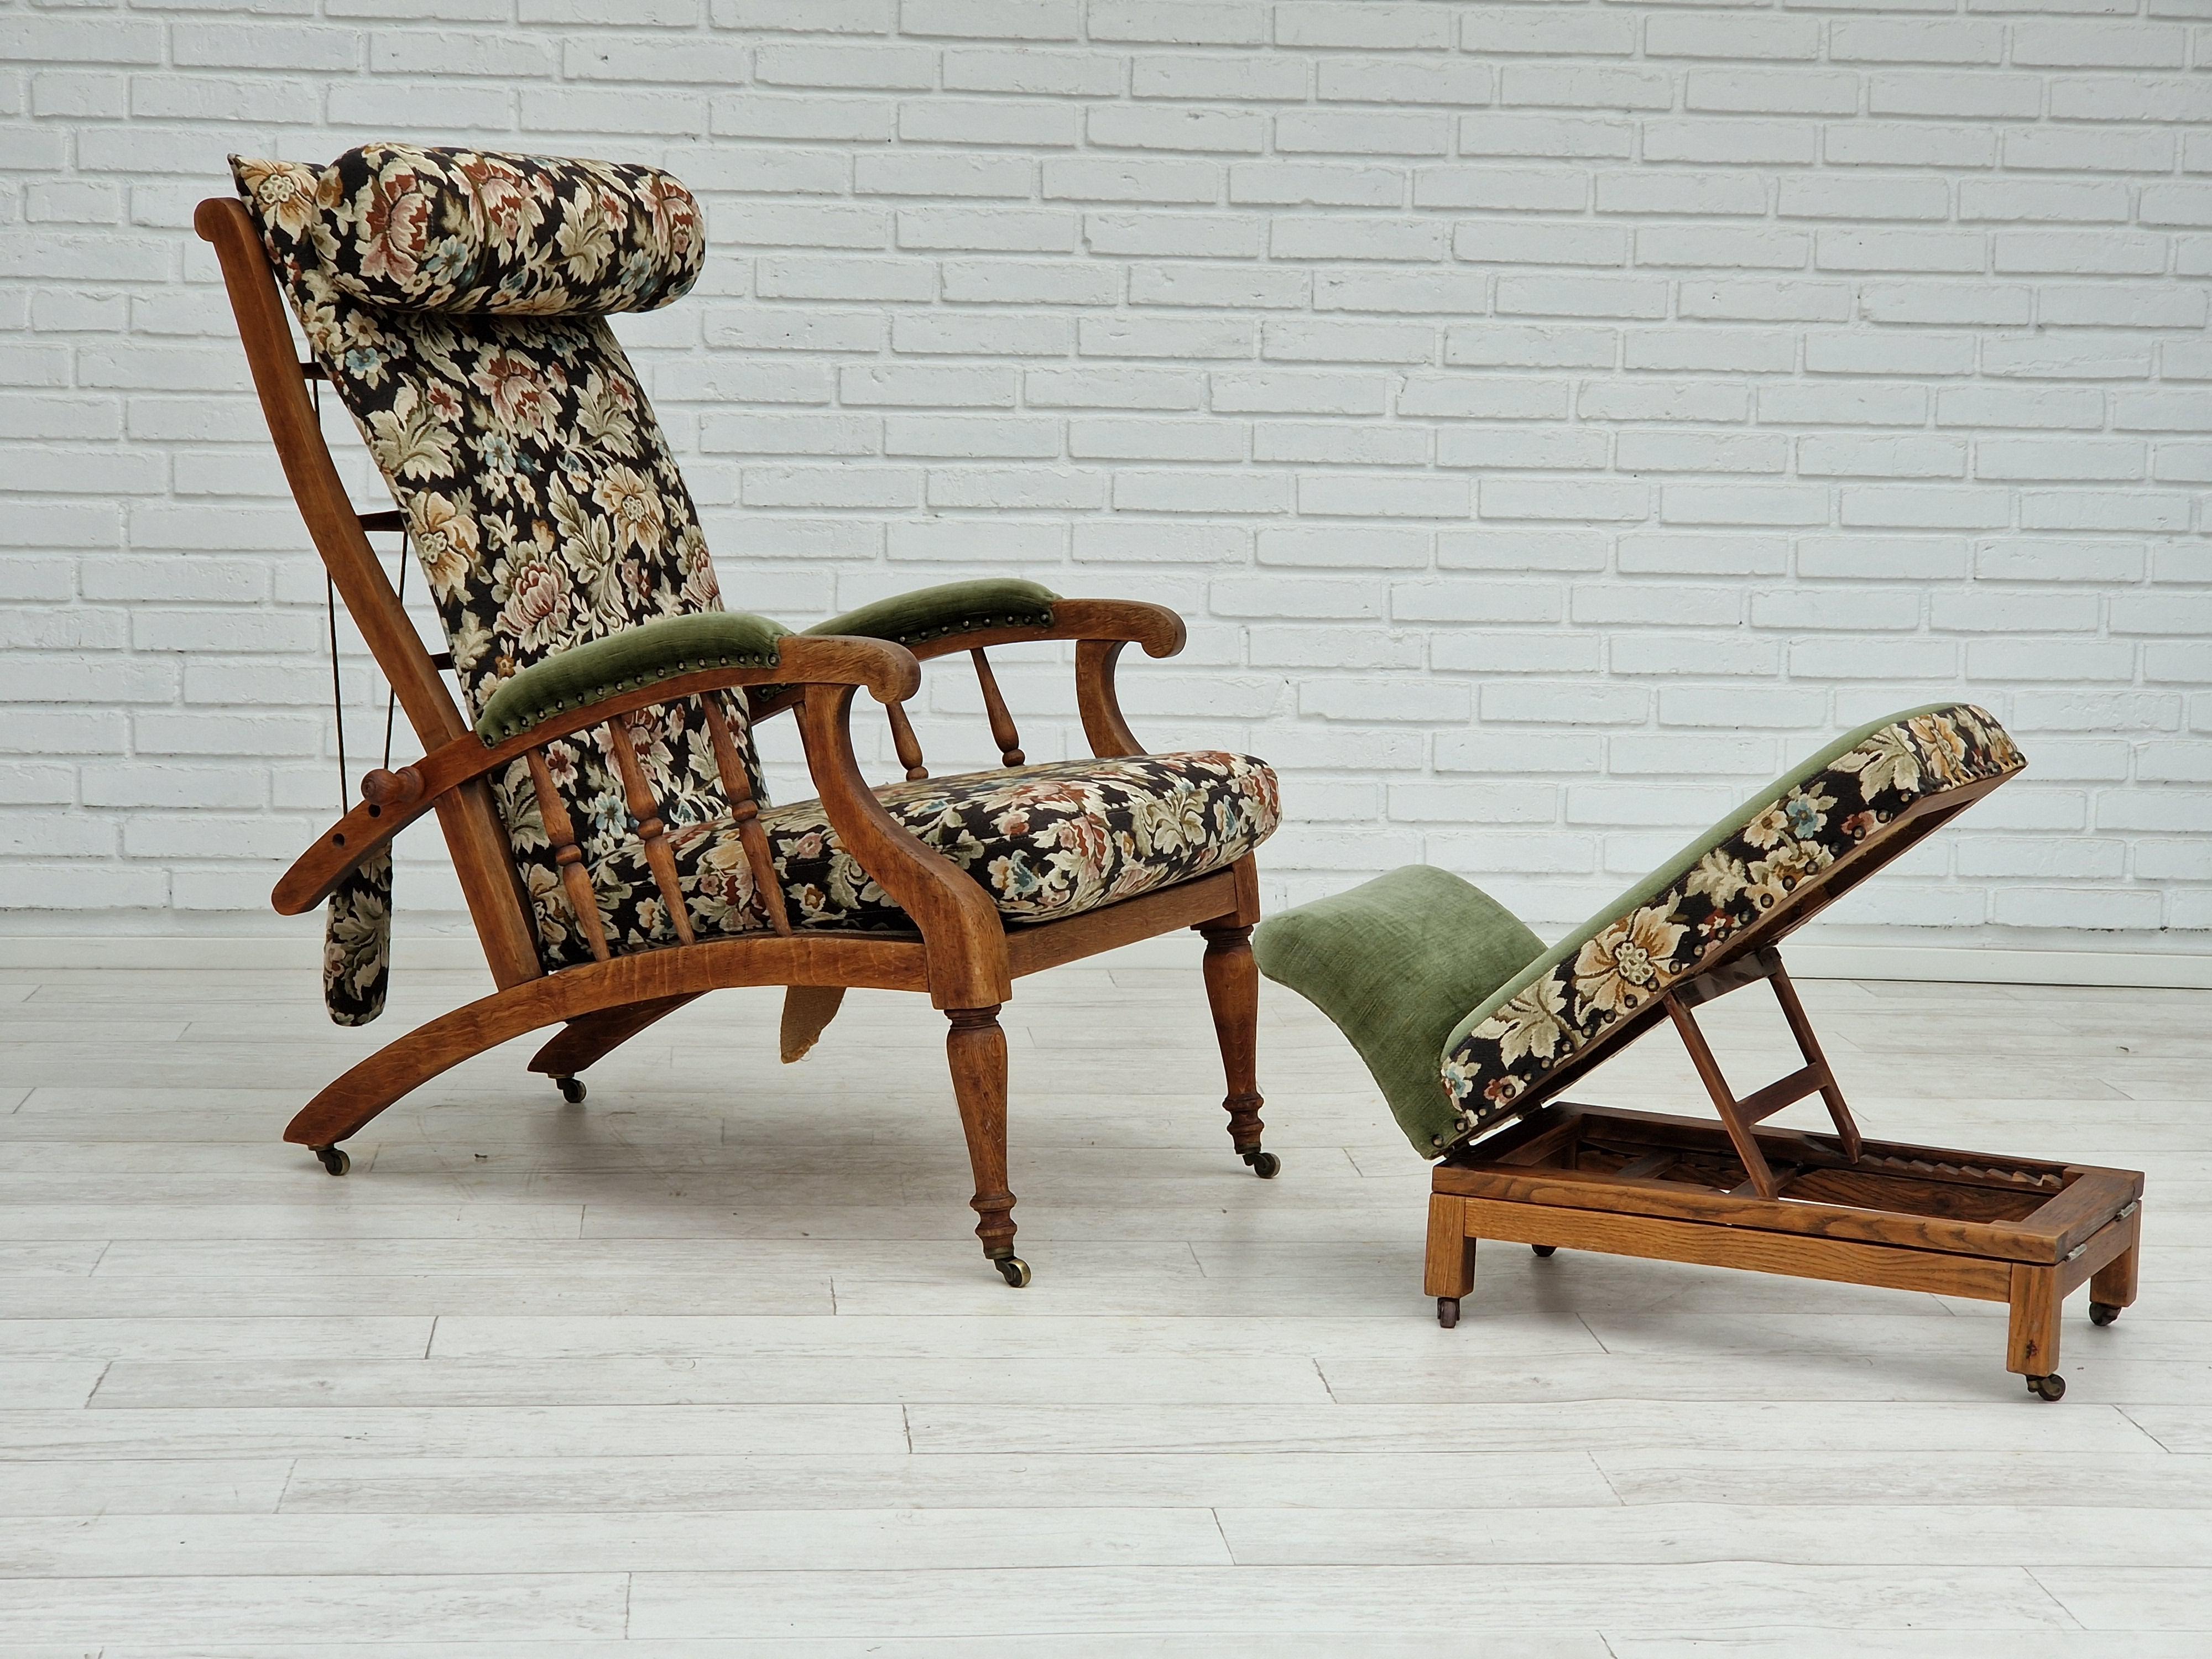 1950s, Original British Design by Jas Shoolbred, Morris and Co. Style In Good Condition For Sale In Tarm, 82